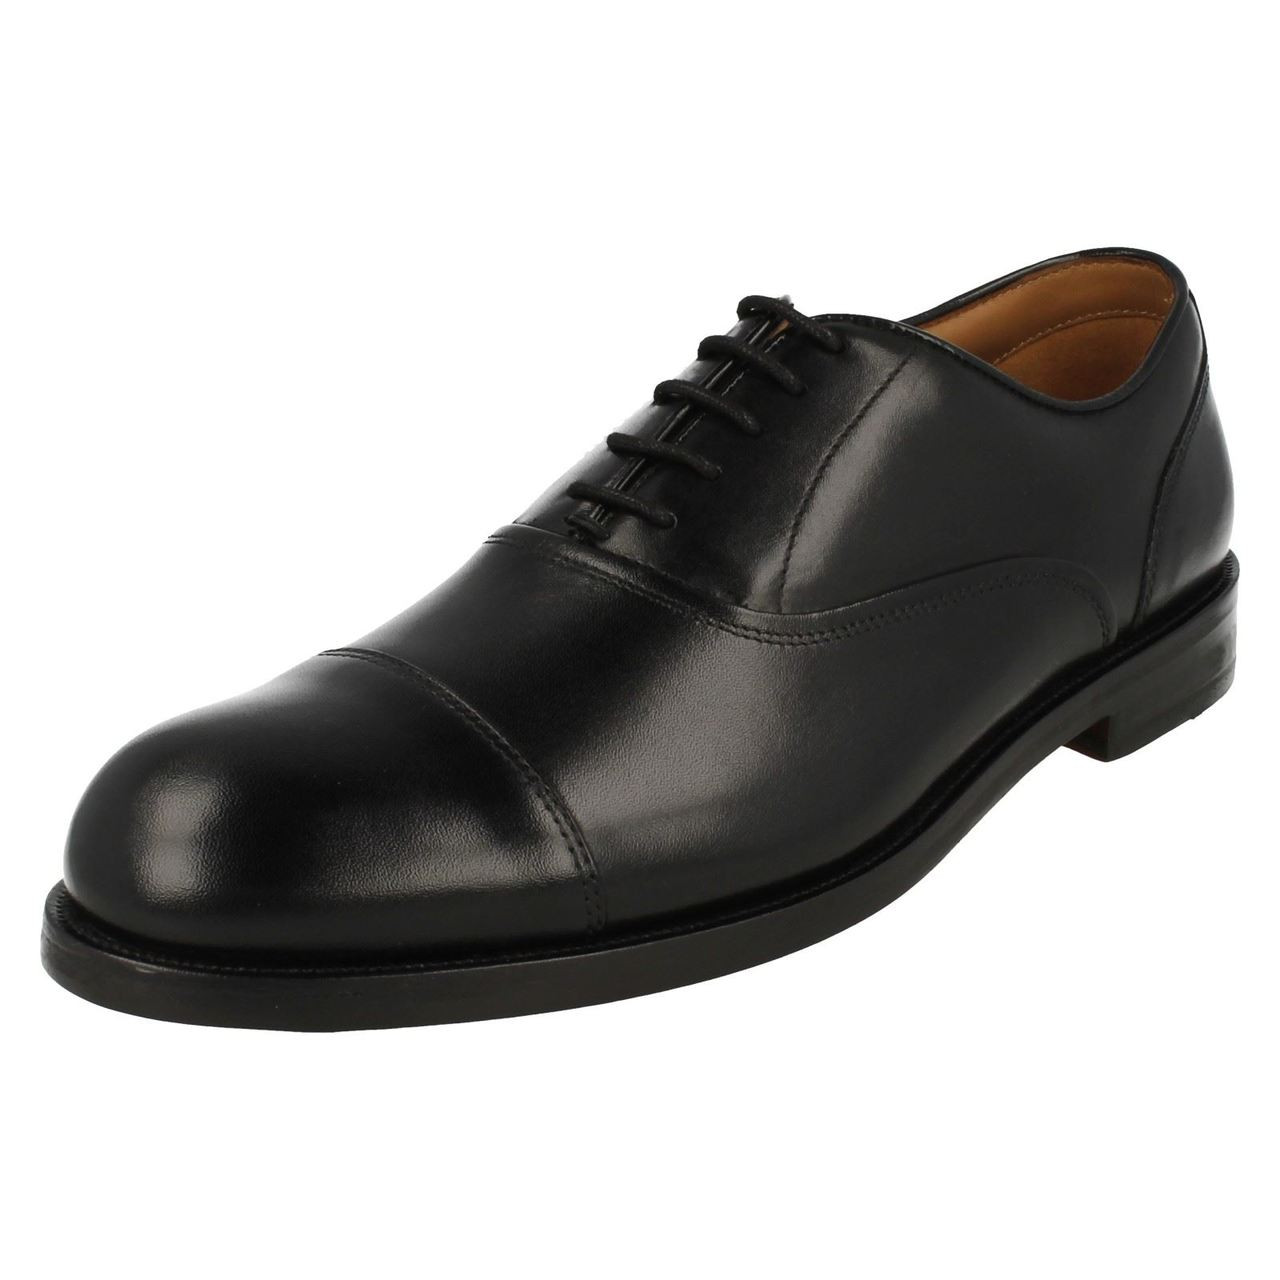 Bank clarks oxford shoes 